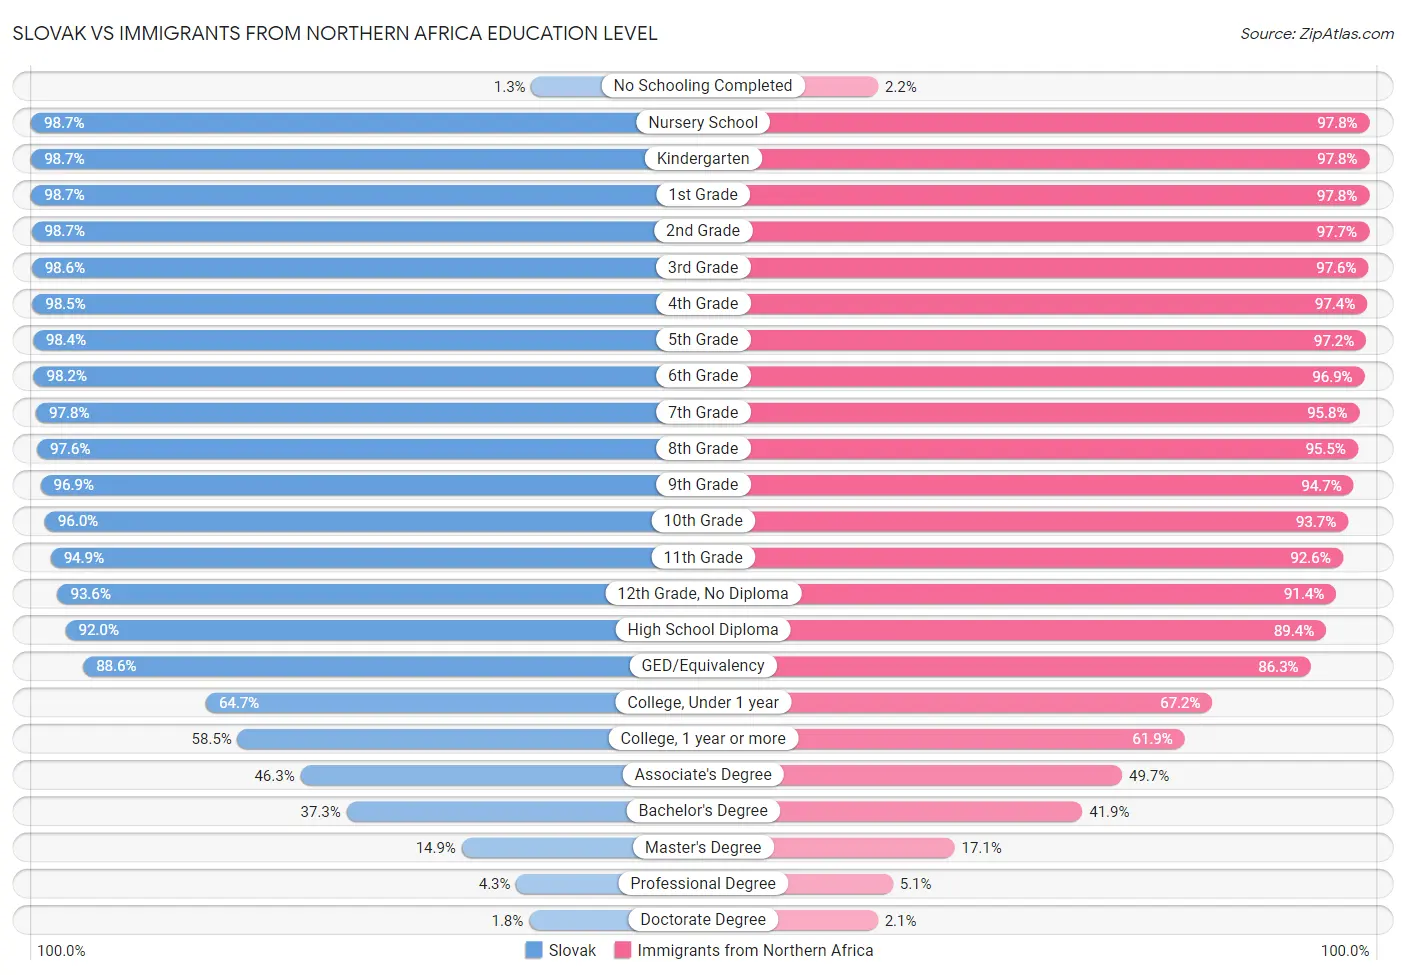 Slovak vs Immigrants from Northern Africa Education Level